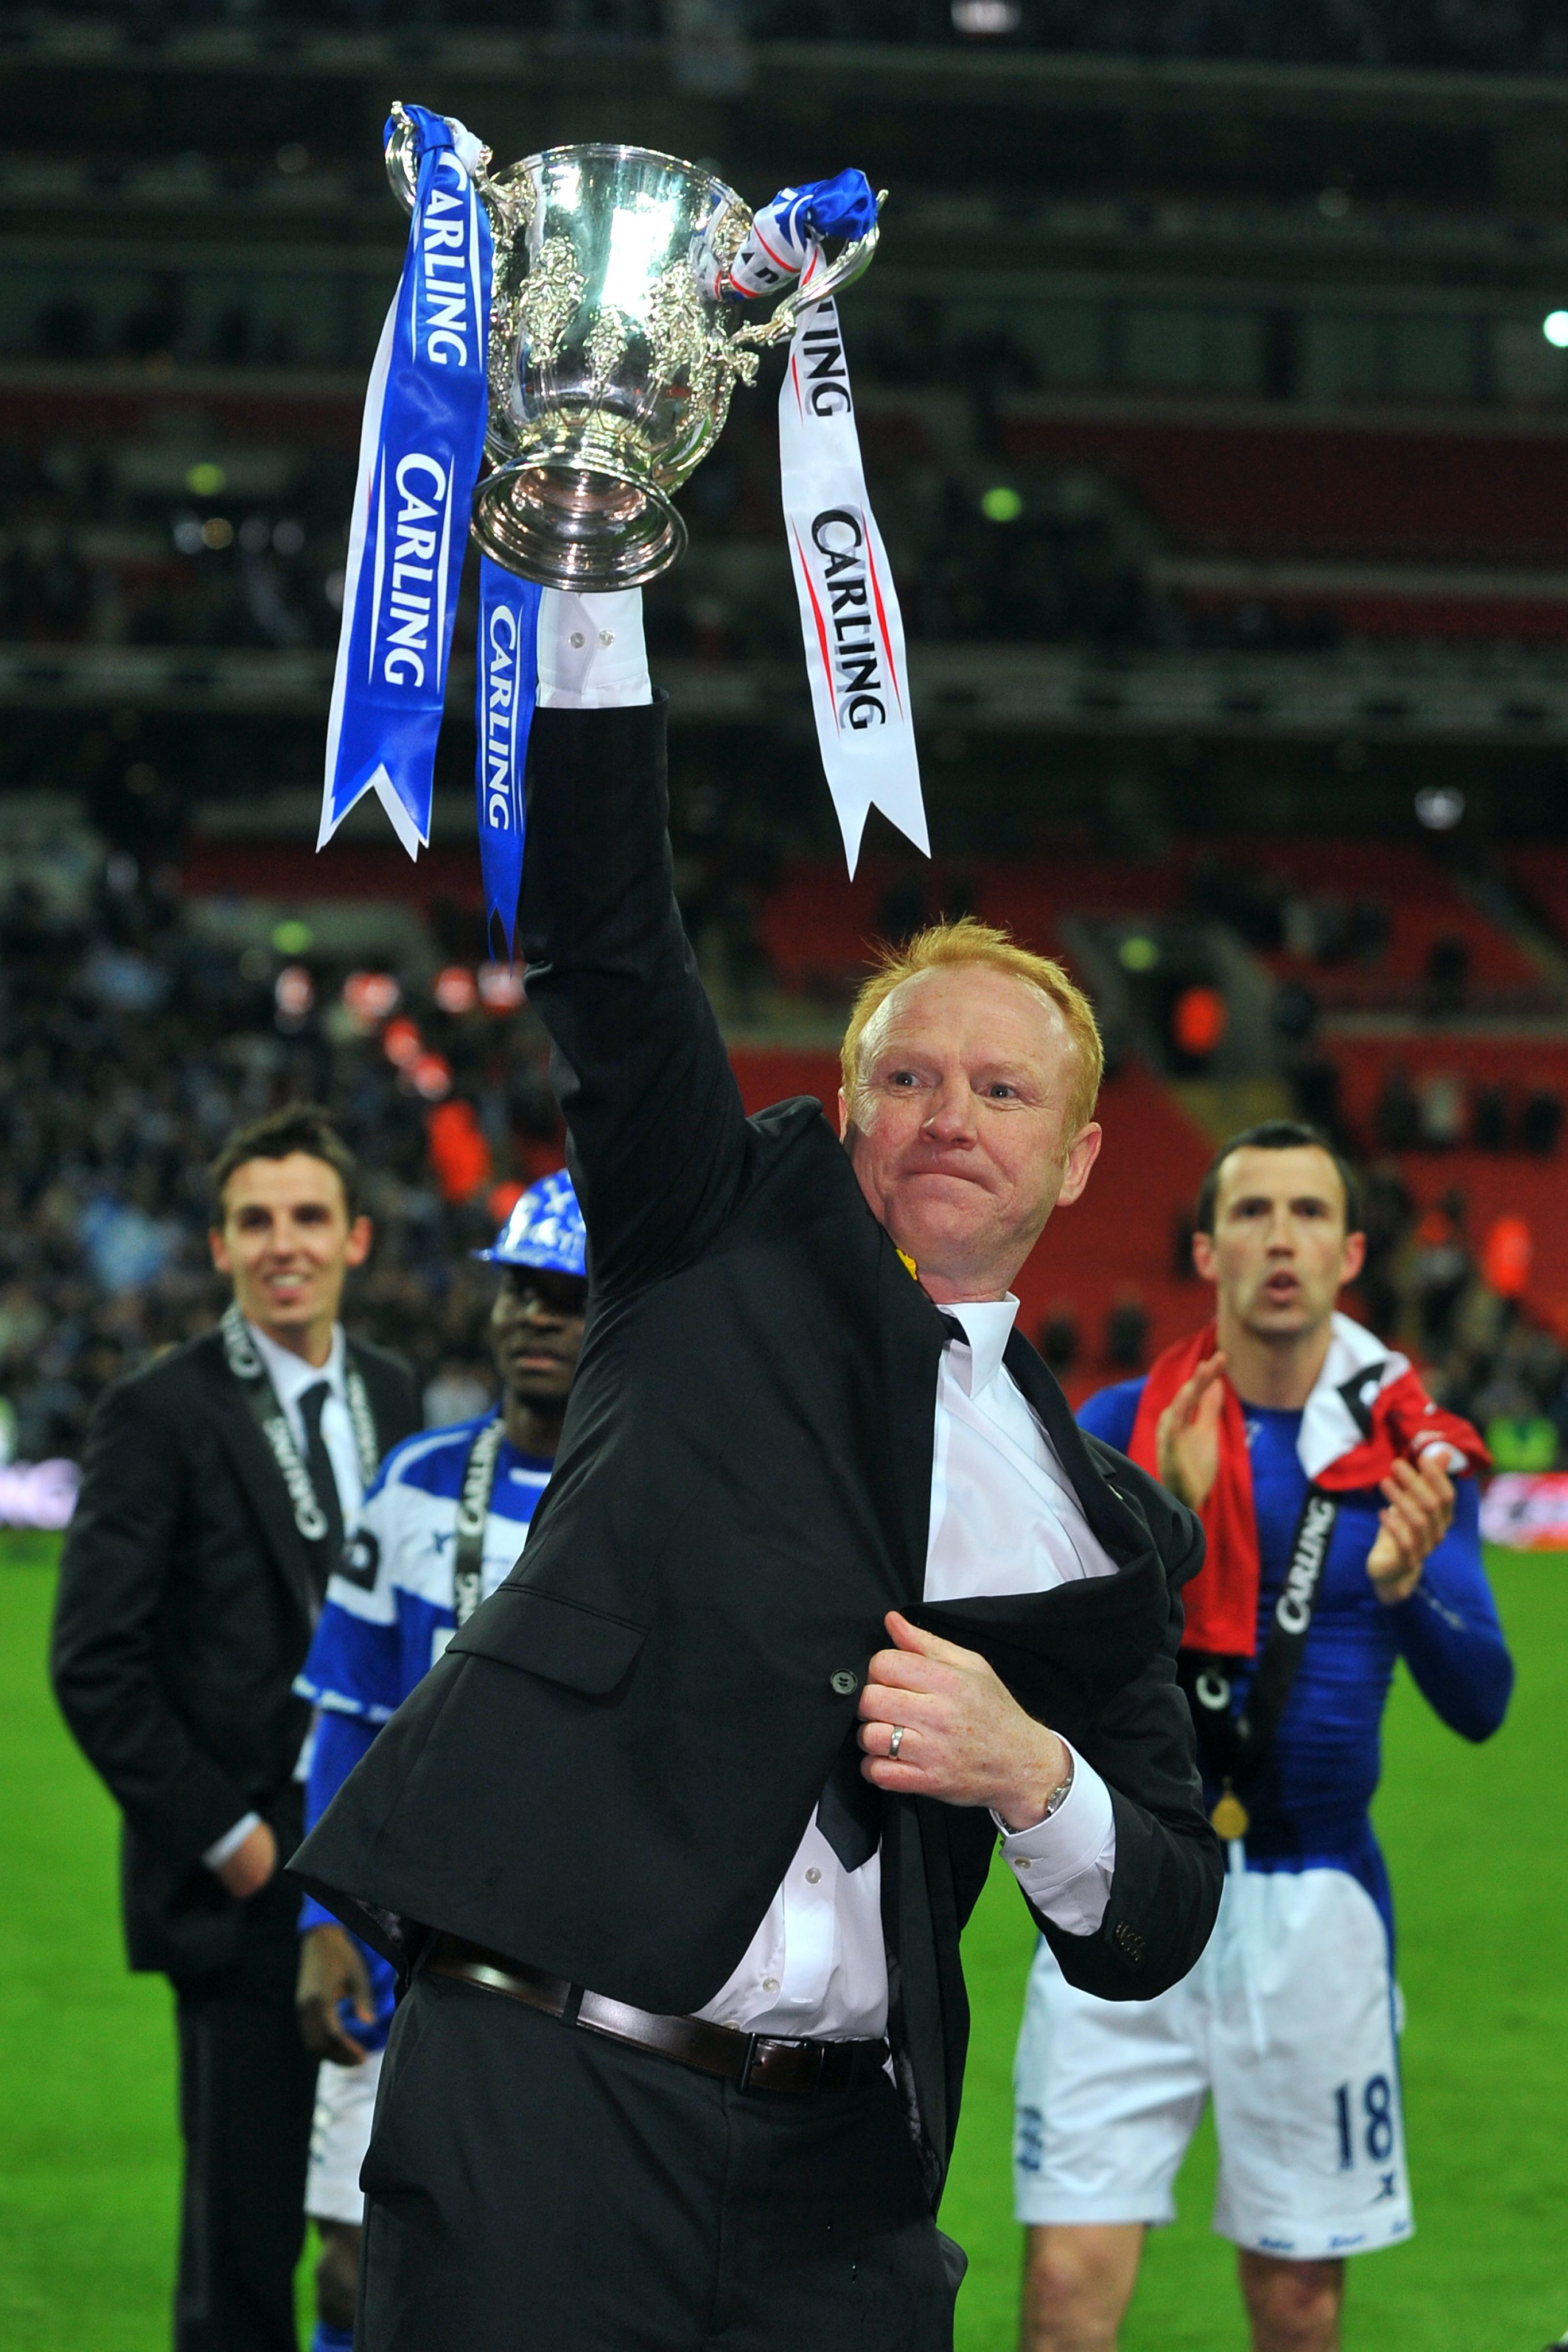 Alex McLeish lifts the League Cup trophy in 2011